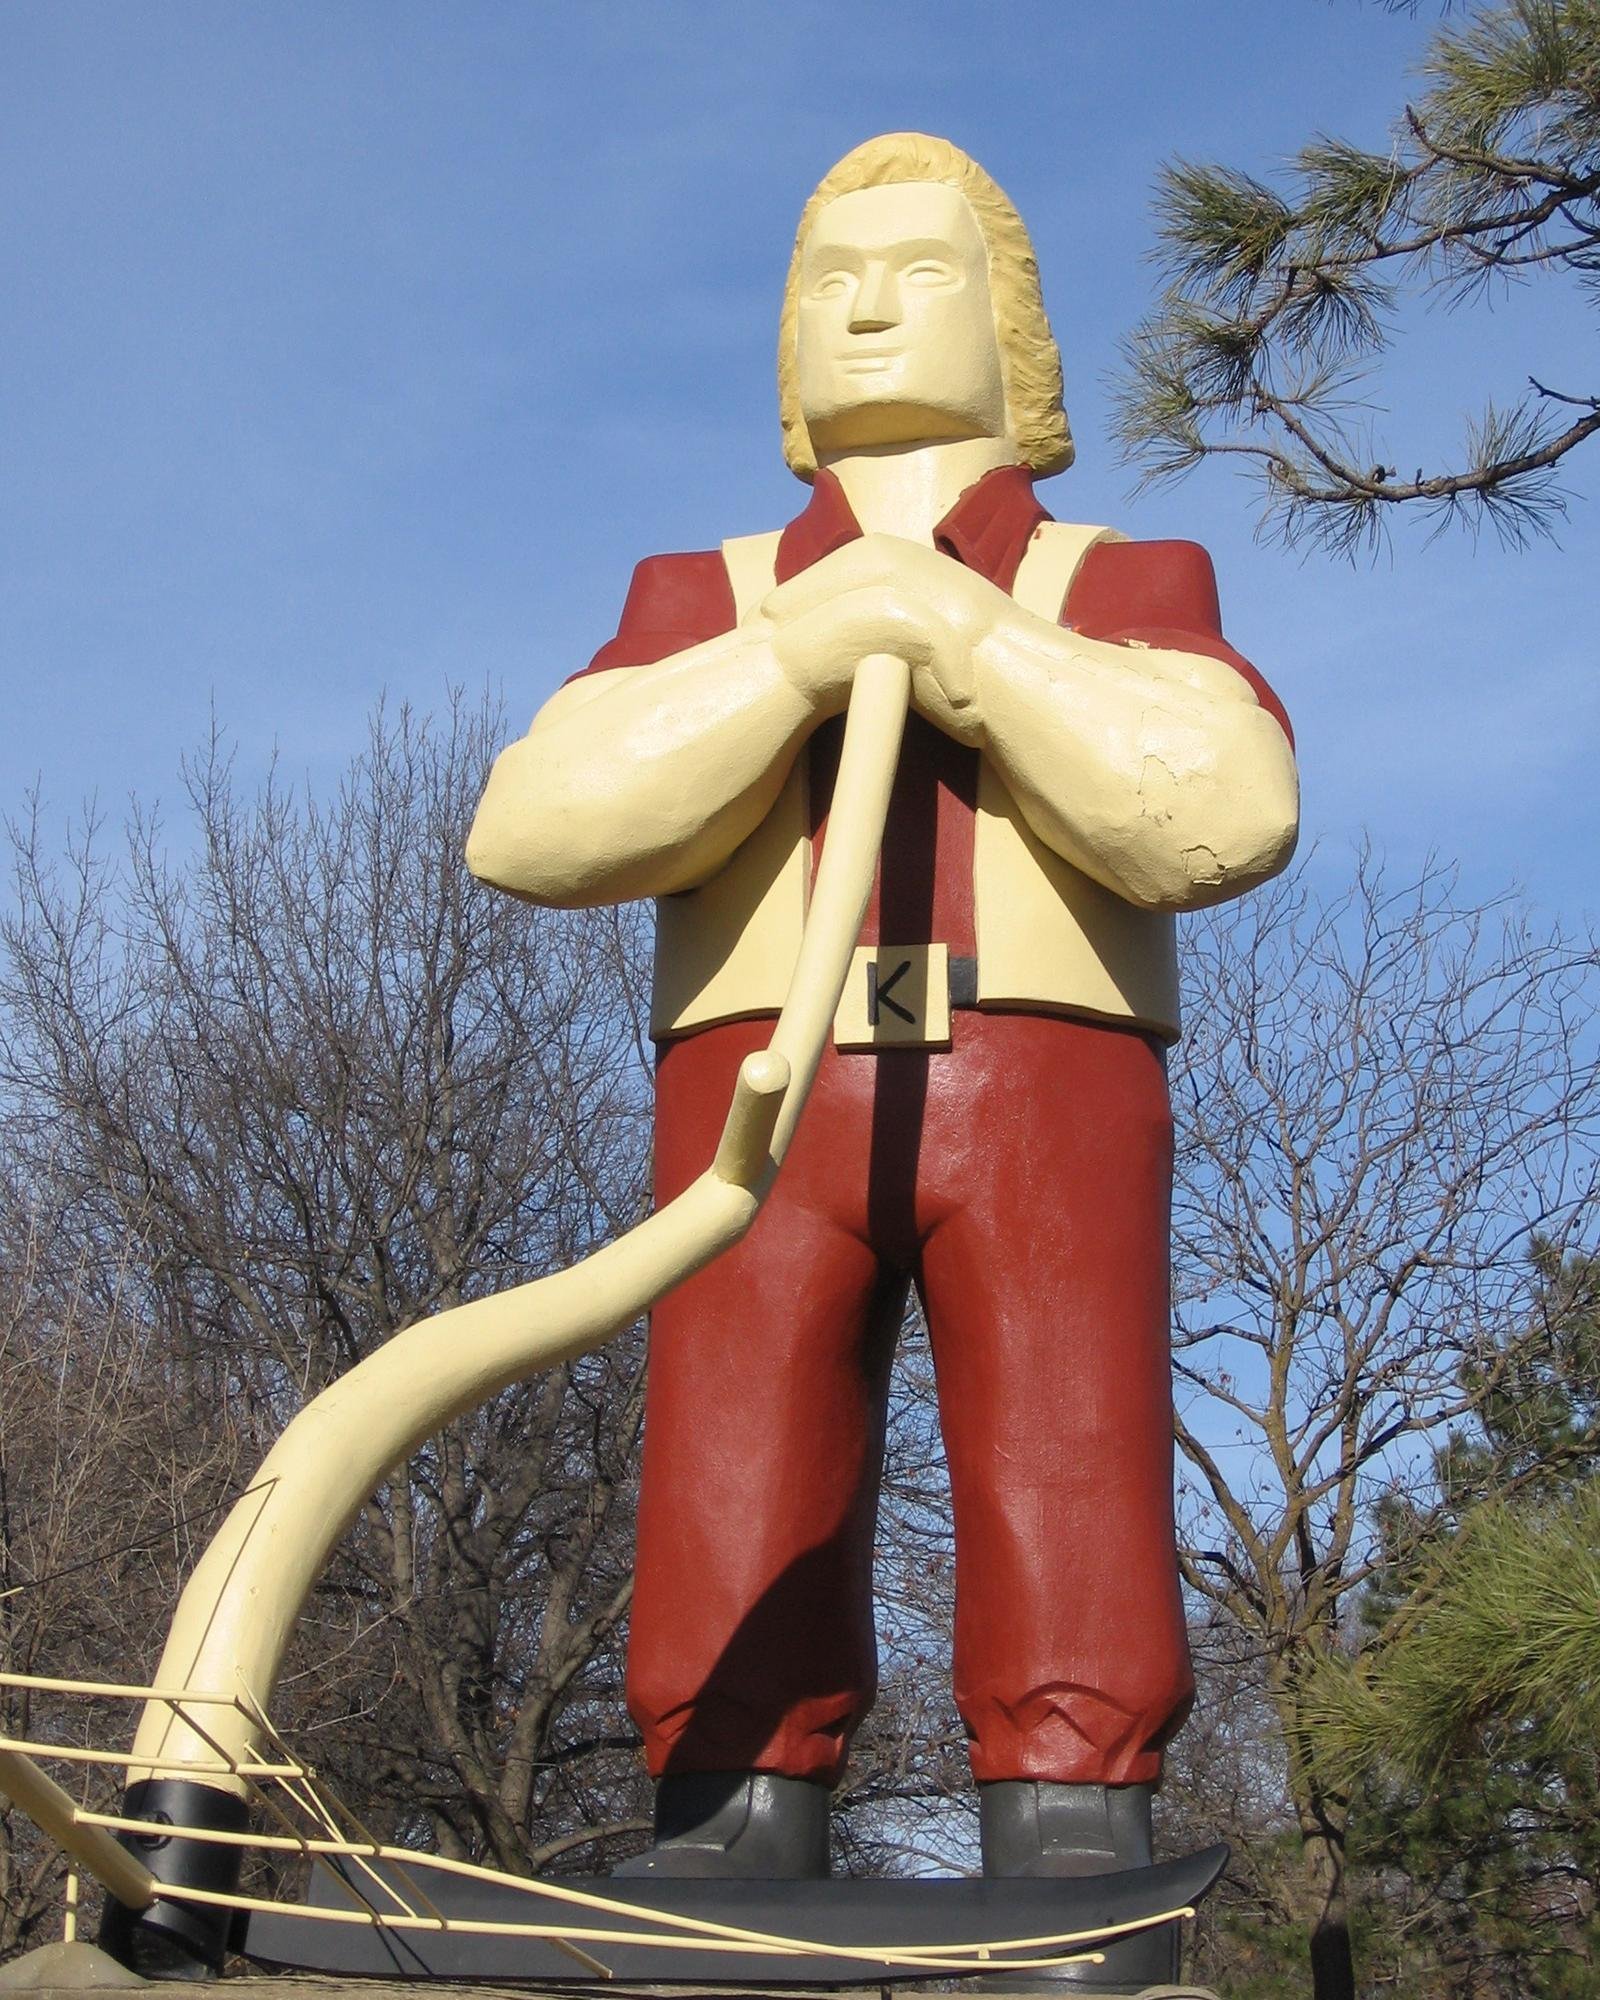 <p>Kansas has many roadside oddities, but few match the kitsch of Johnny Kaw, the state's answer to Paul Bunyan, the giant mythological lumberjack. Situated in City Park in Manhattan, Kansas, the 30-foot-tall concrete-and-steel statue of Kaw — who holds a scythe for harvesting wheat, rather than an ax like Bunyan — makes an awesome selfie companion.  </p>